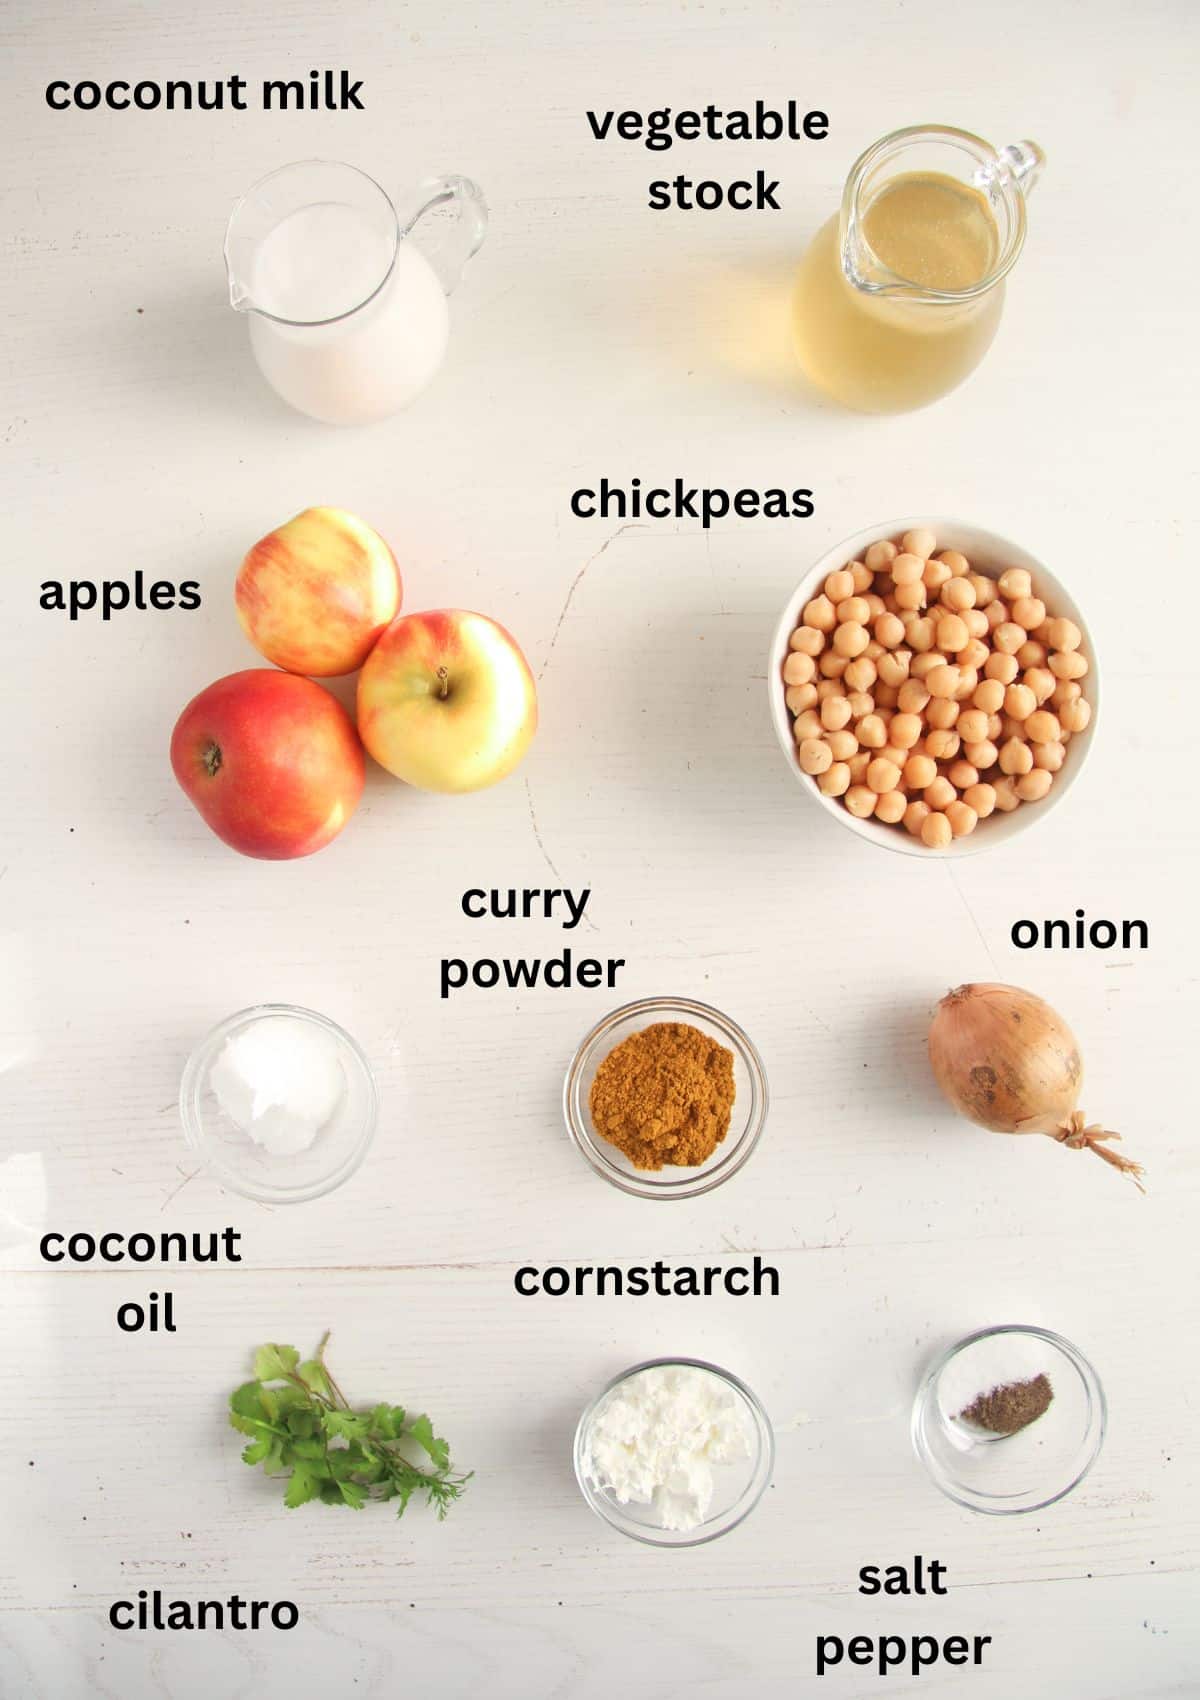 listed ingredients for making curry with apples, coconut milk and chickpeas.